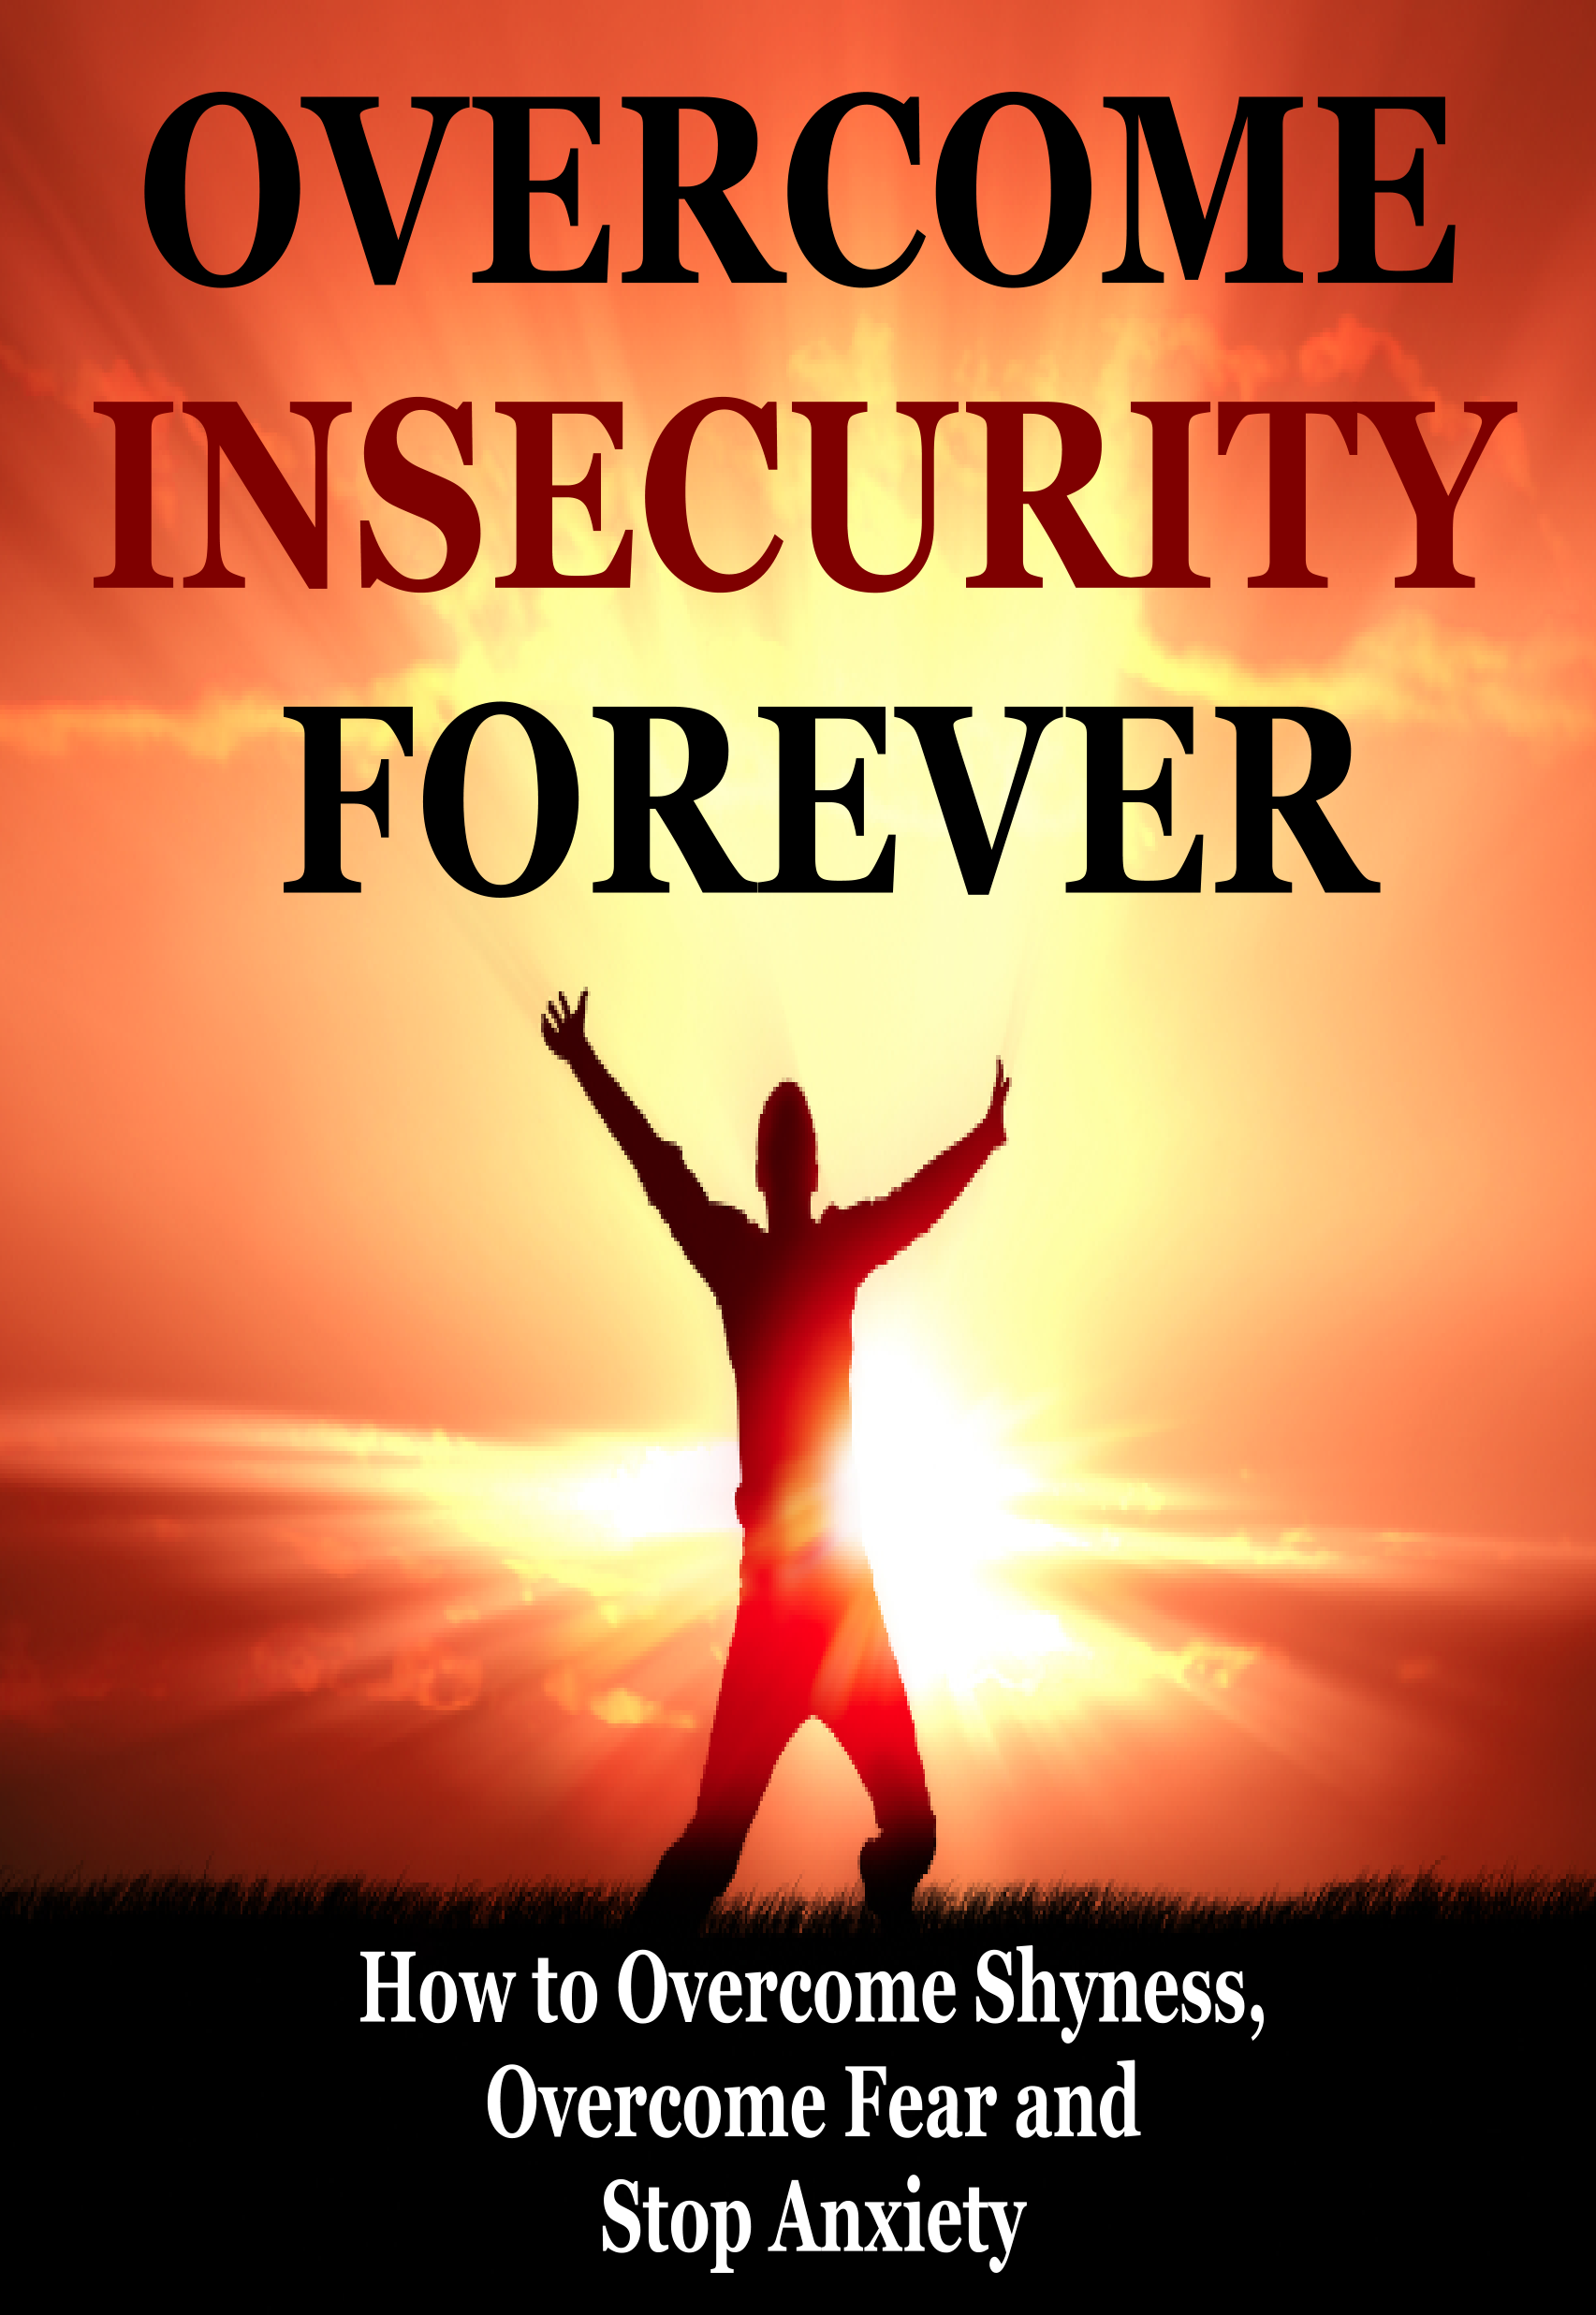 Overcome Insecurity Forever: How to Overcome Shyness, Overcome Fear and Stop Anxiety (Shyness and Social Anxiety, Insecurity) by Kris Kaynes